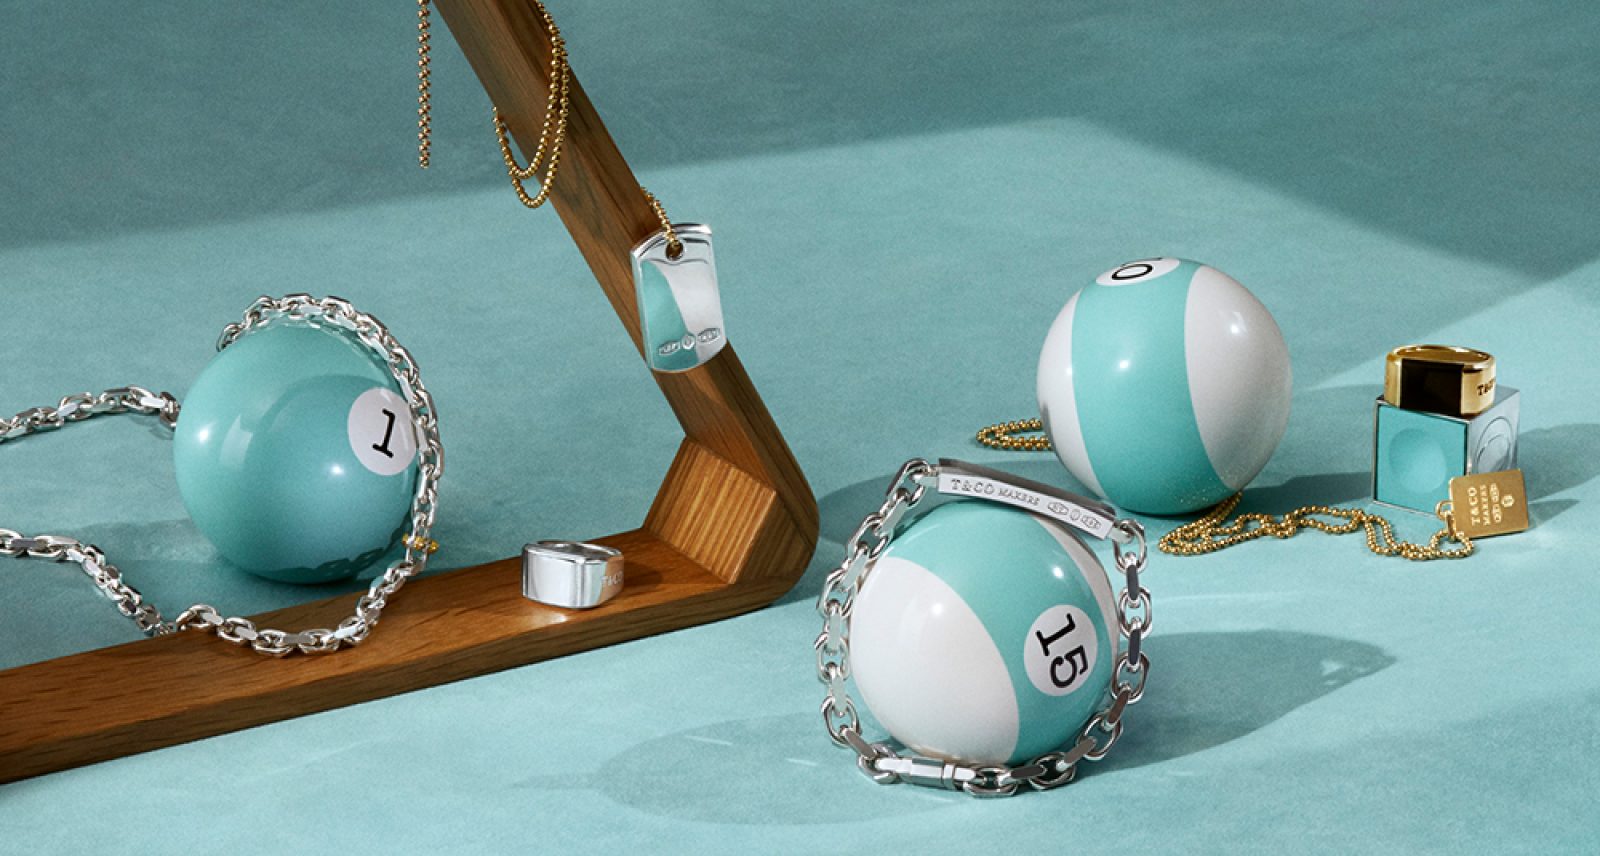 Tiffany & Co.’s First Full Men’s Collection Is Packed With Shiny Gift